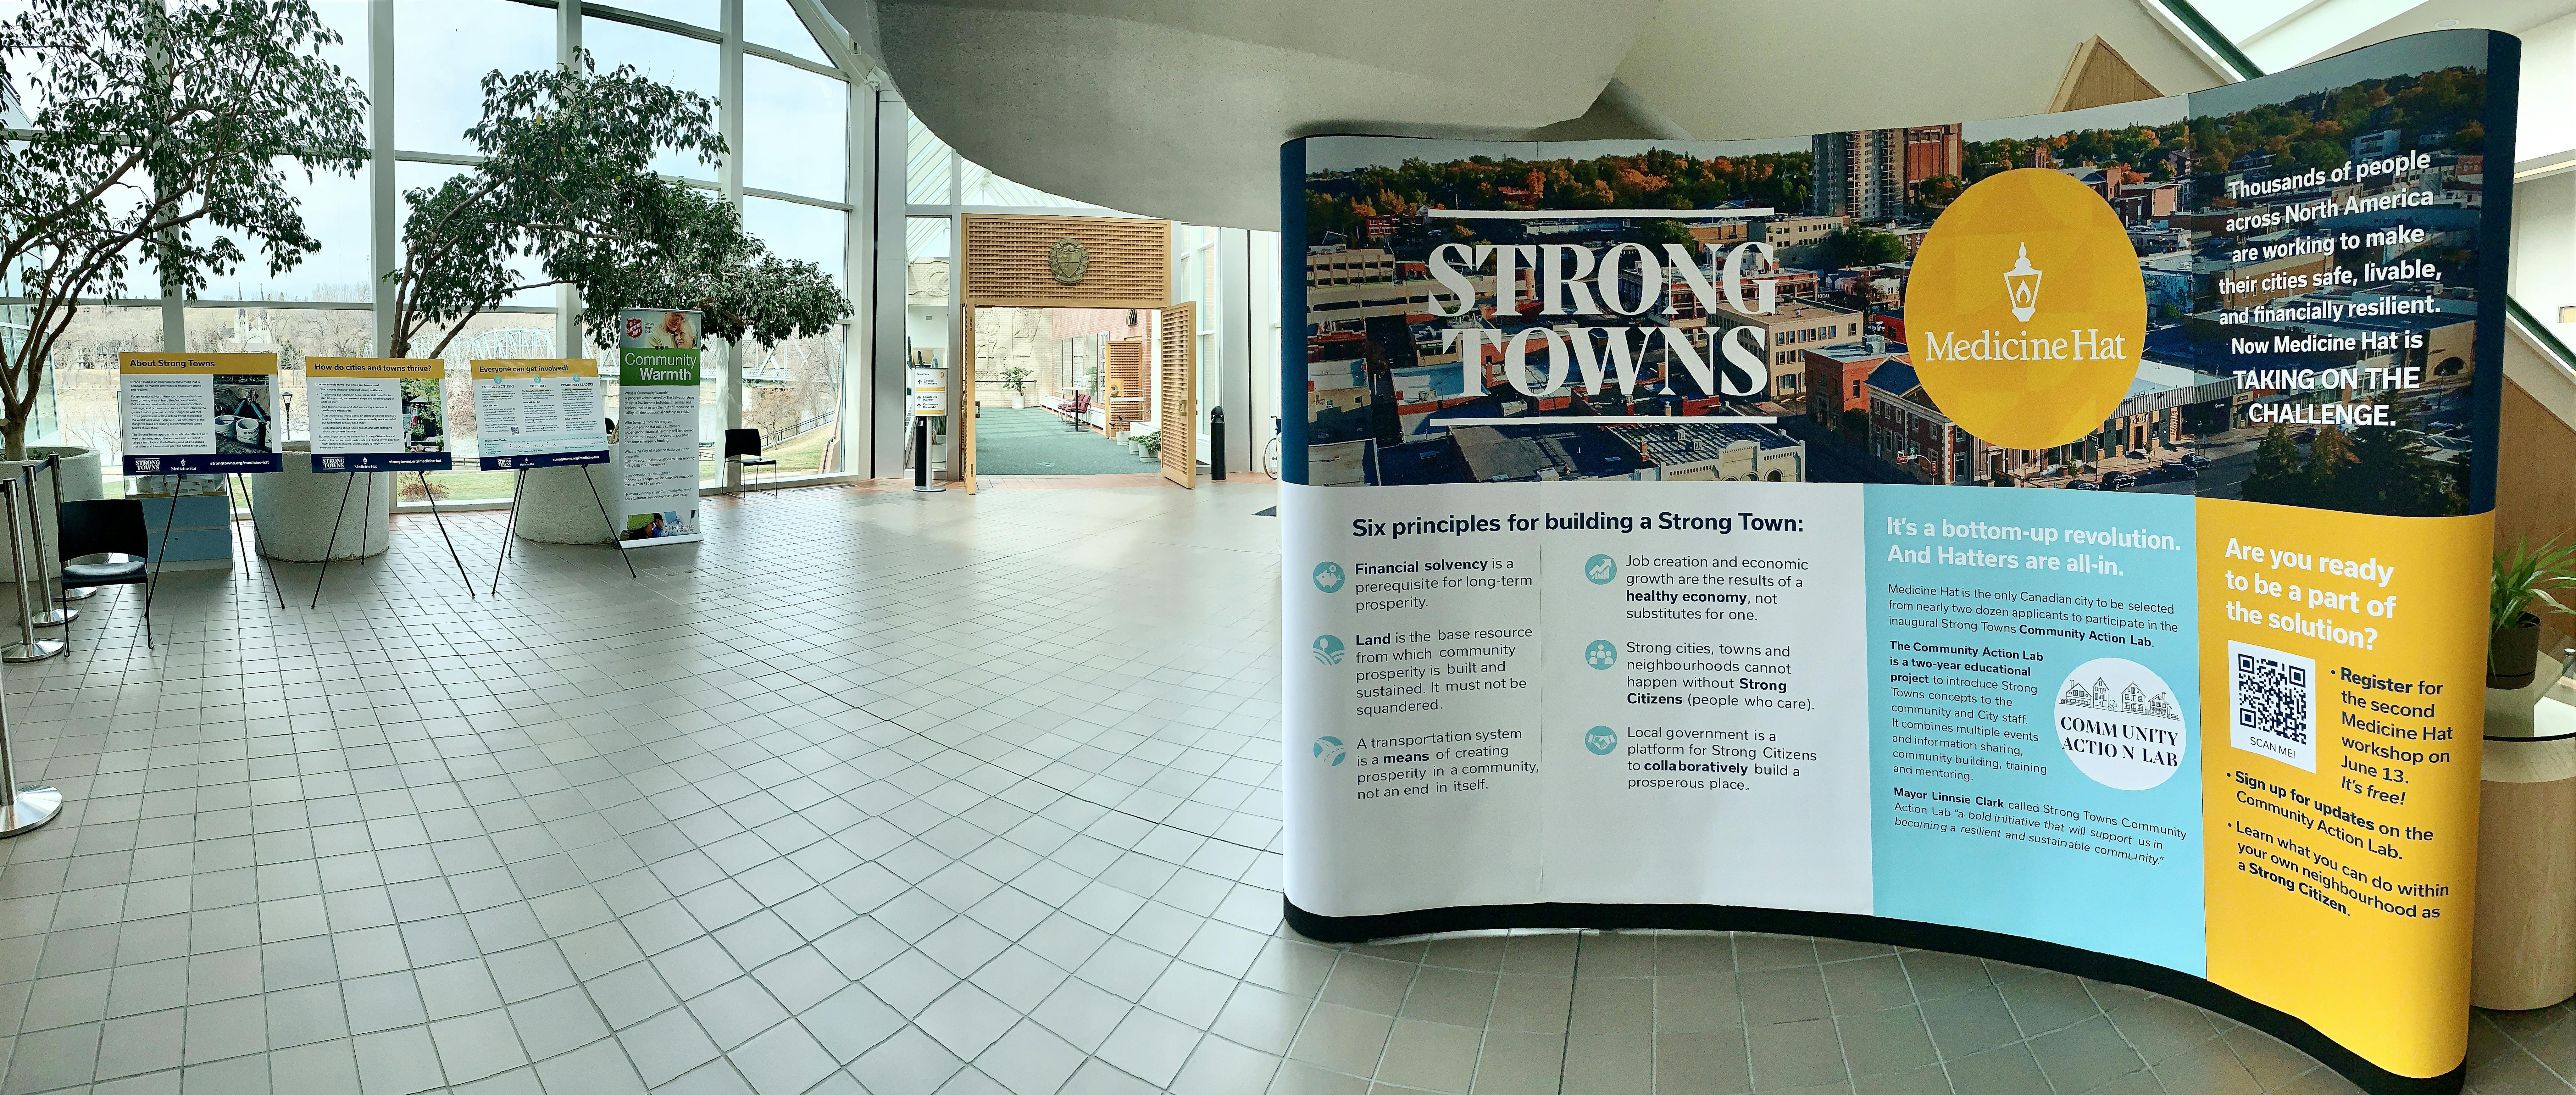 Strong Towns information boards set up in City Hall lobby